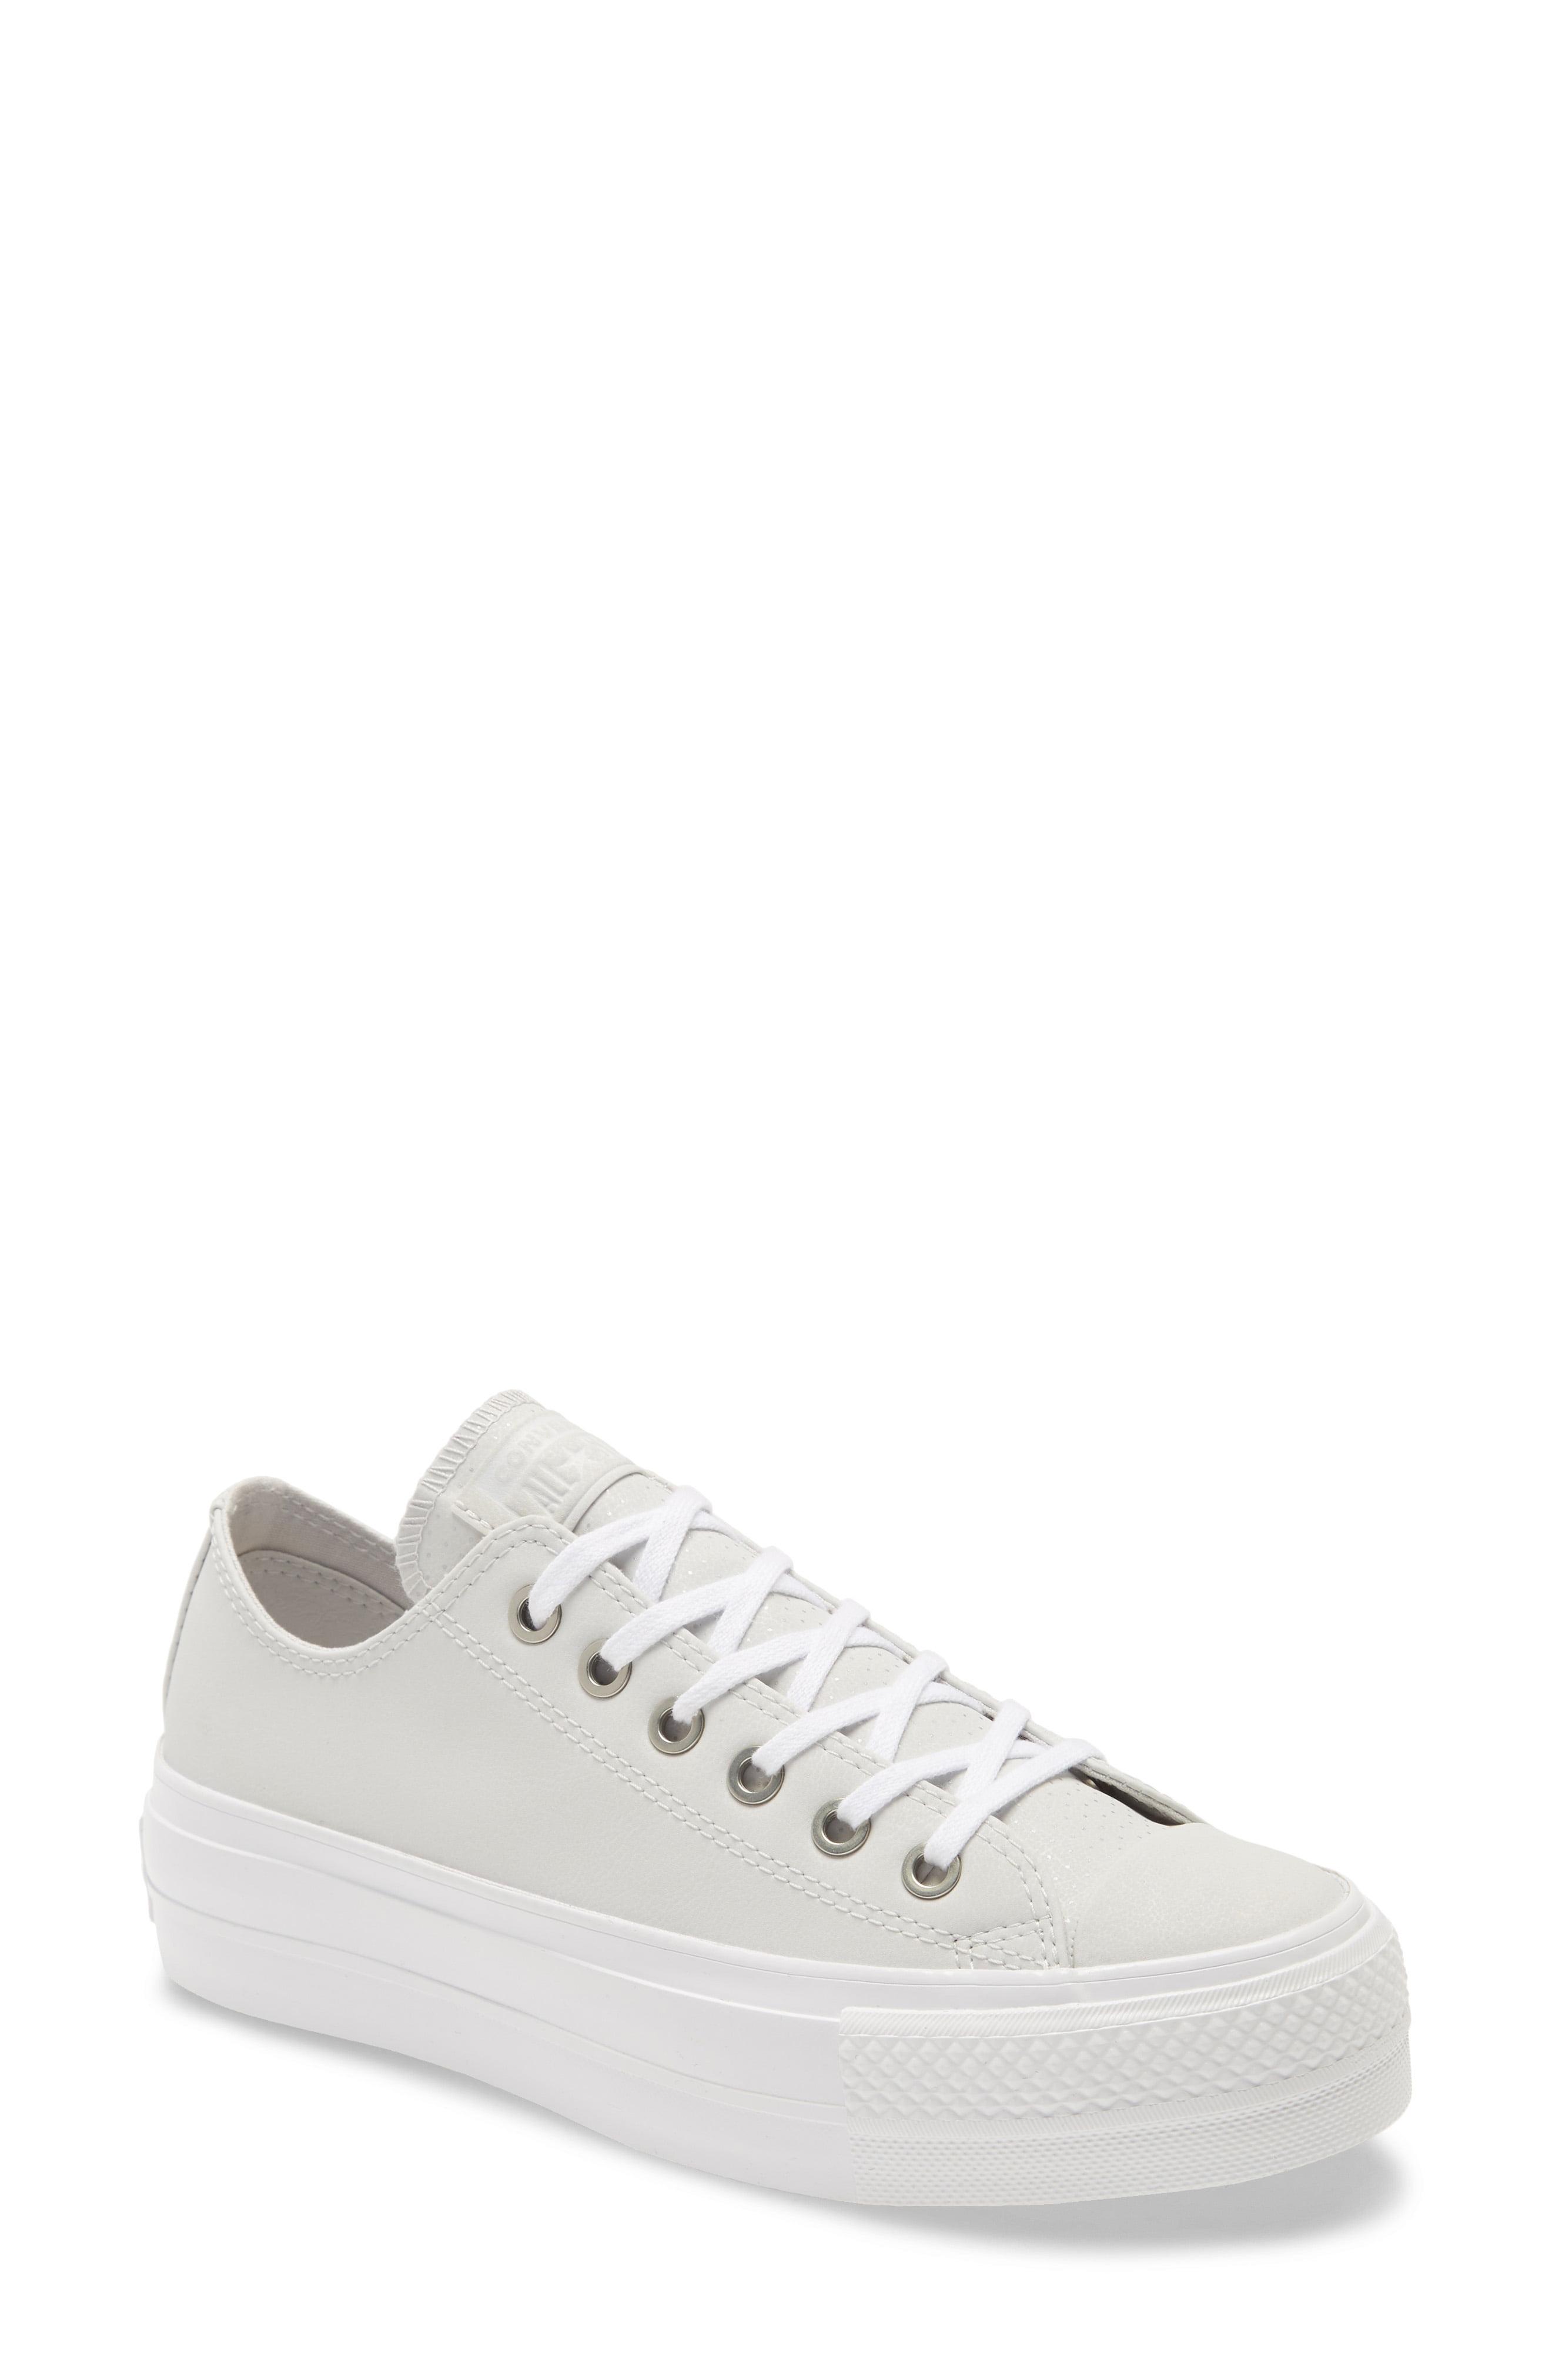 Converse Chuck Taylor All Star Lift Ox Platform Sneaker in White | Lyst